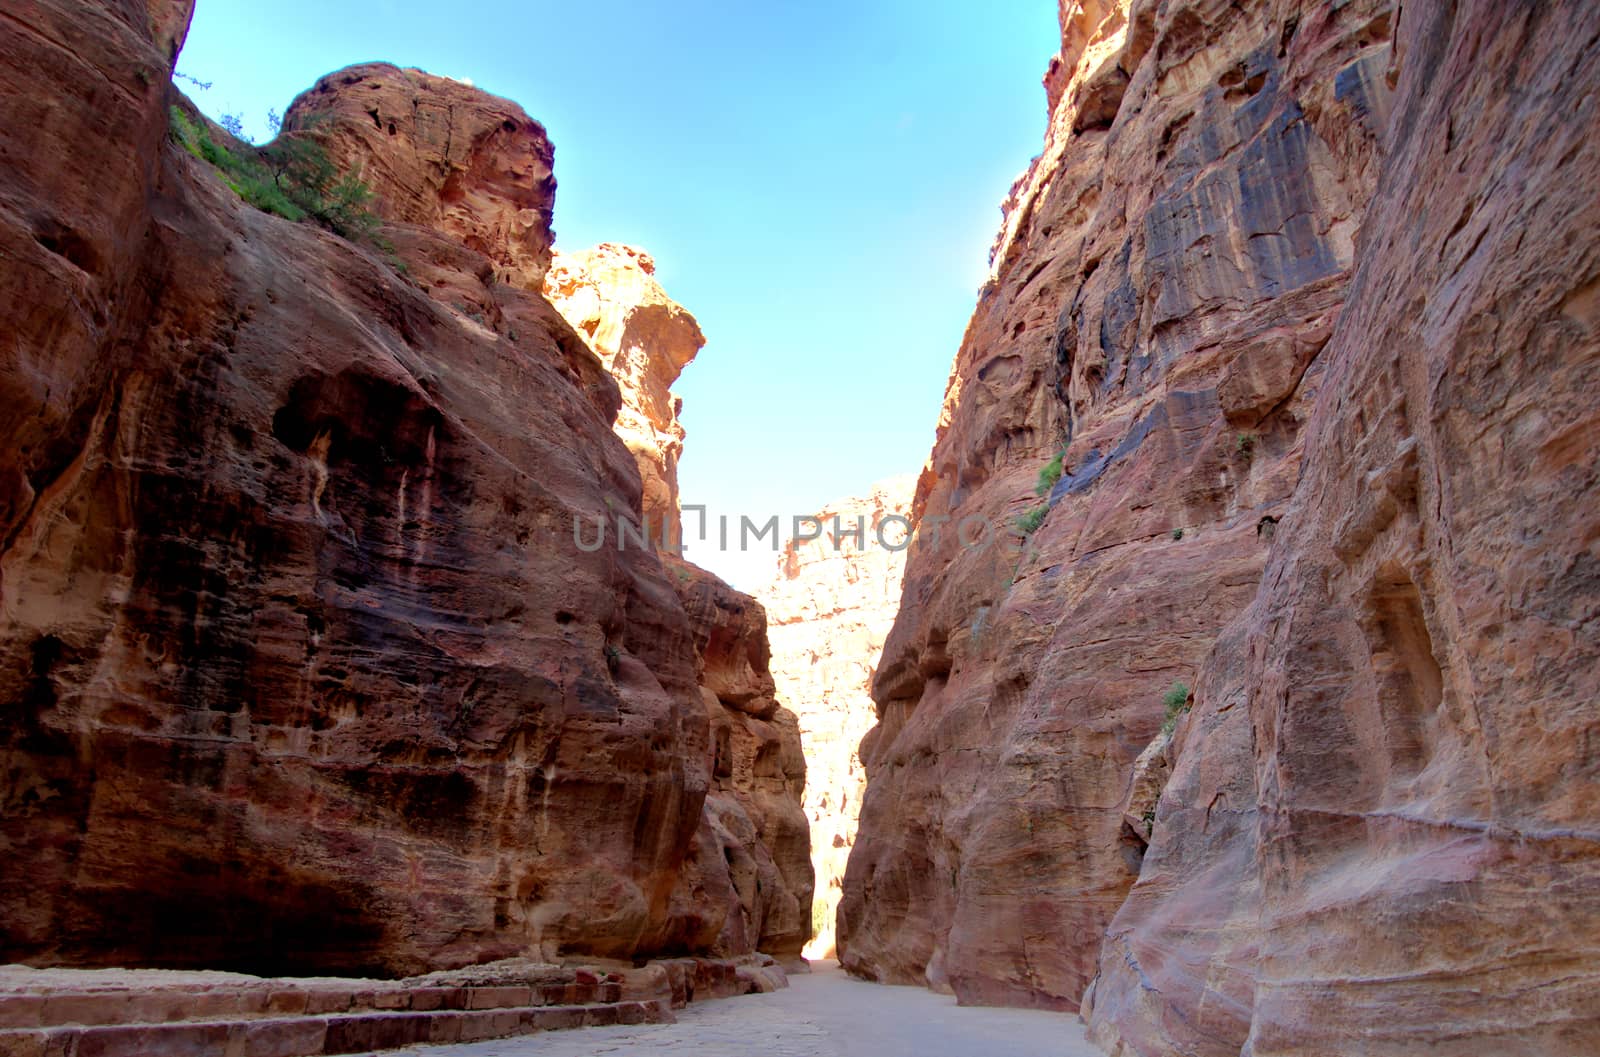 View front from the interior of the Siq leading into the new seventh wonder of the world of Petra in Jordan by geogif